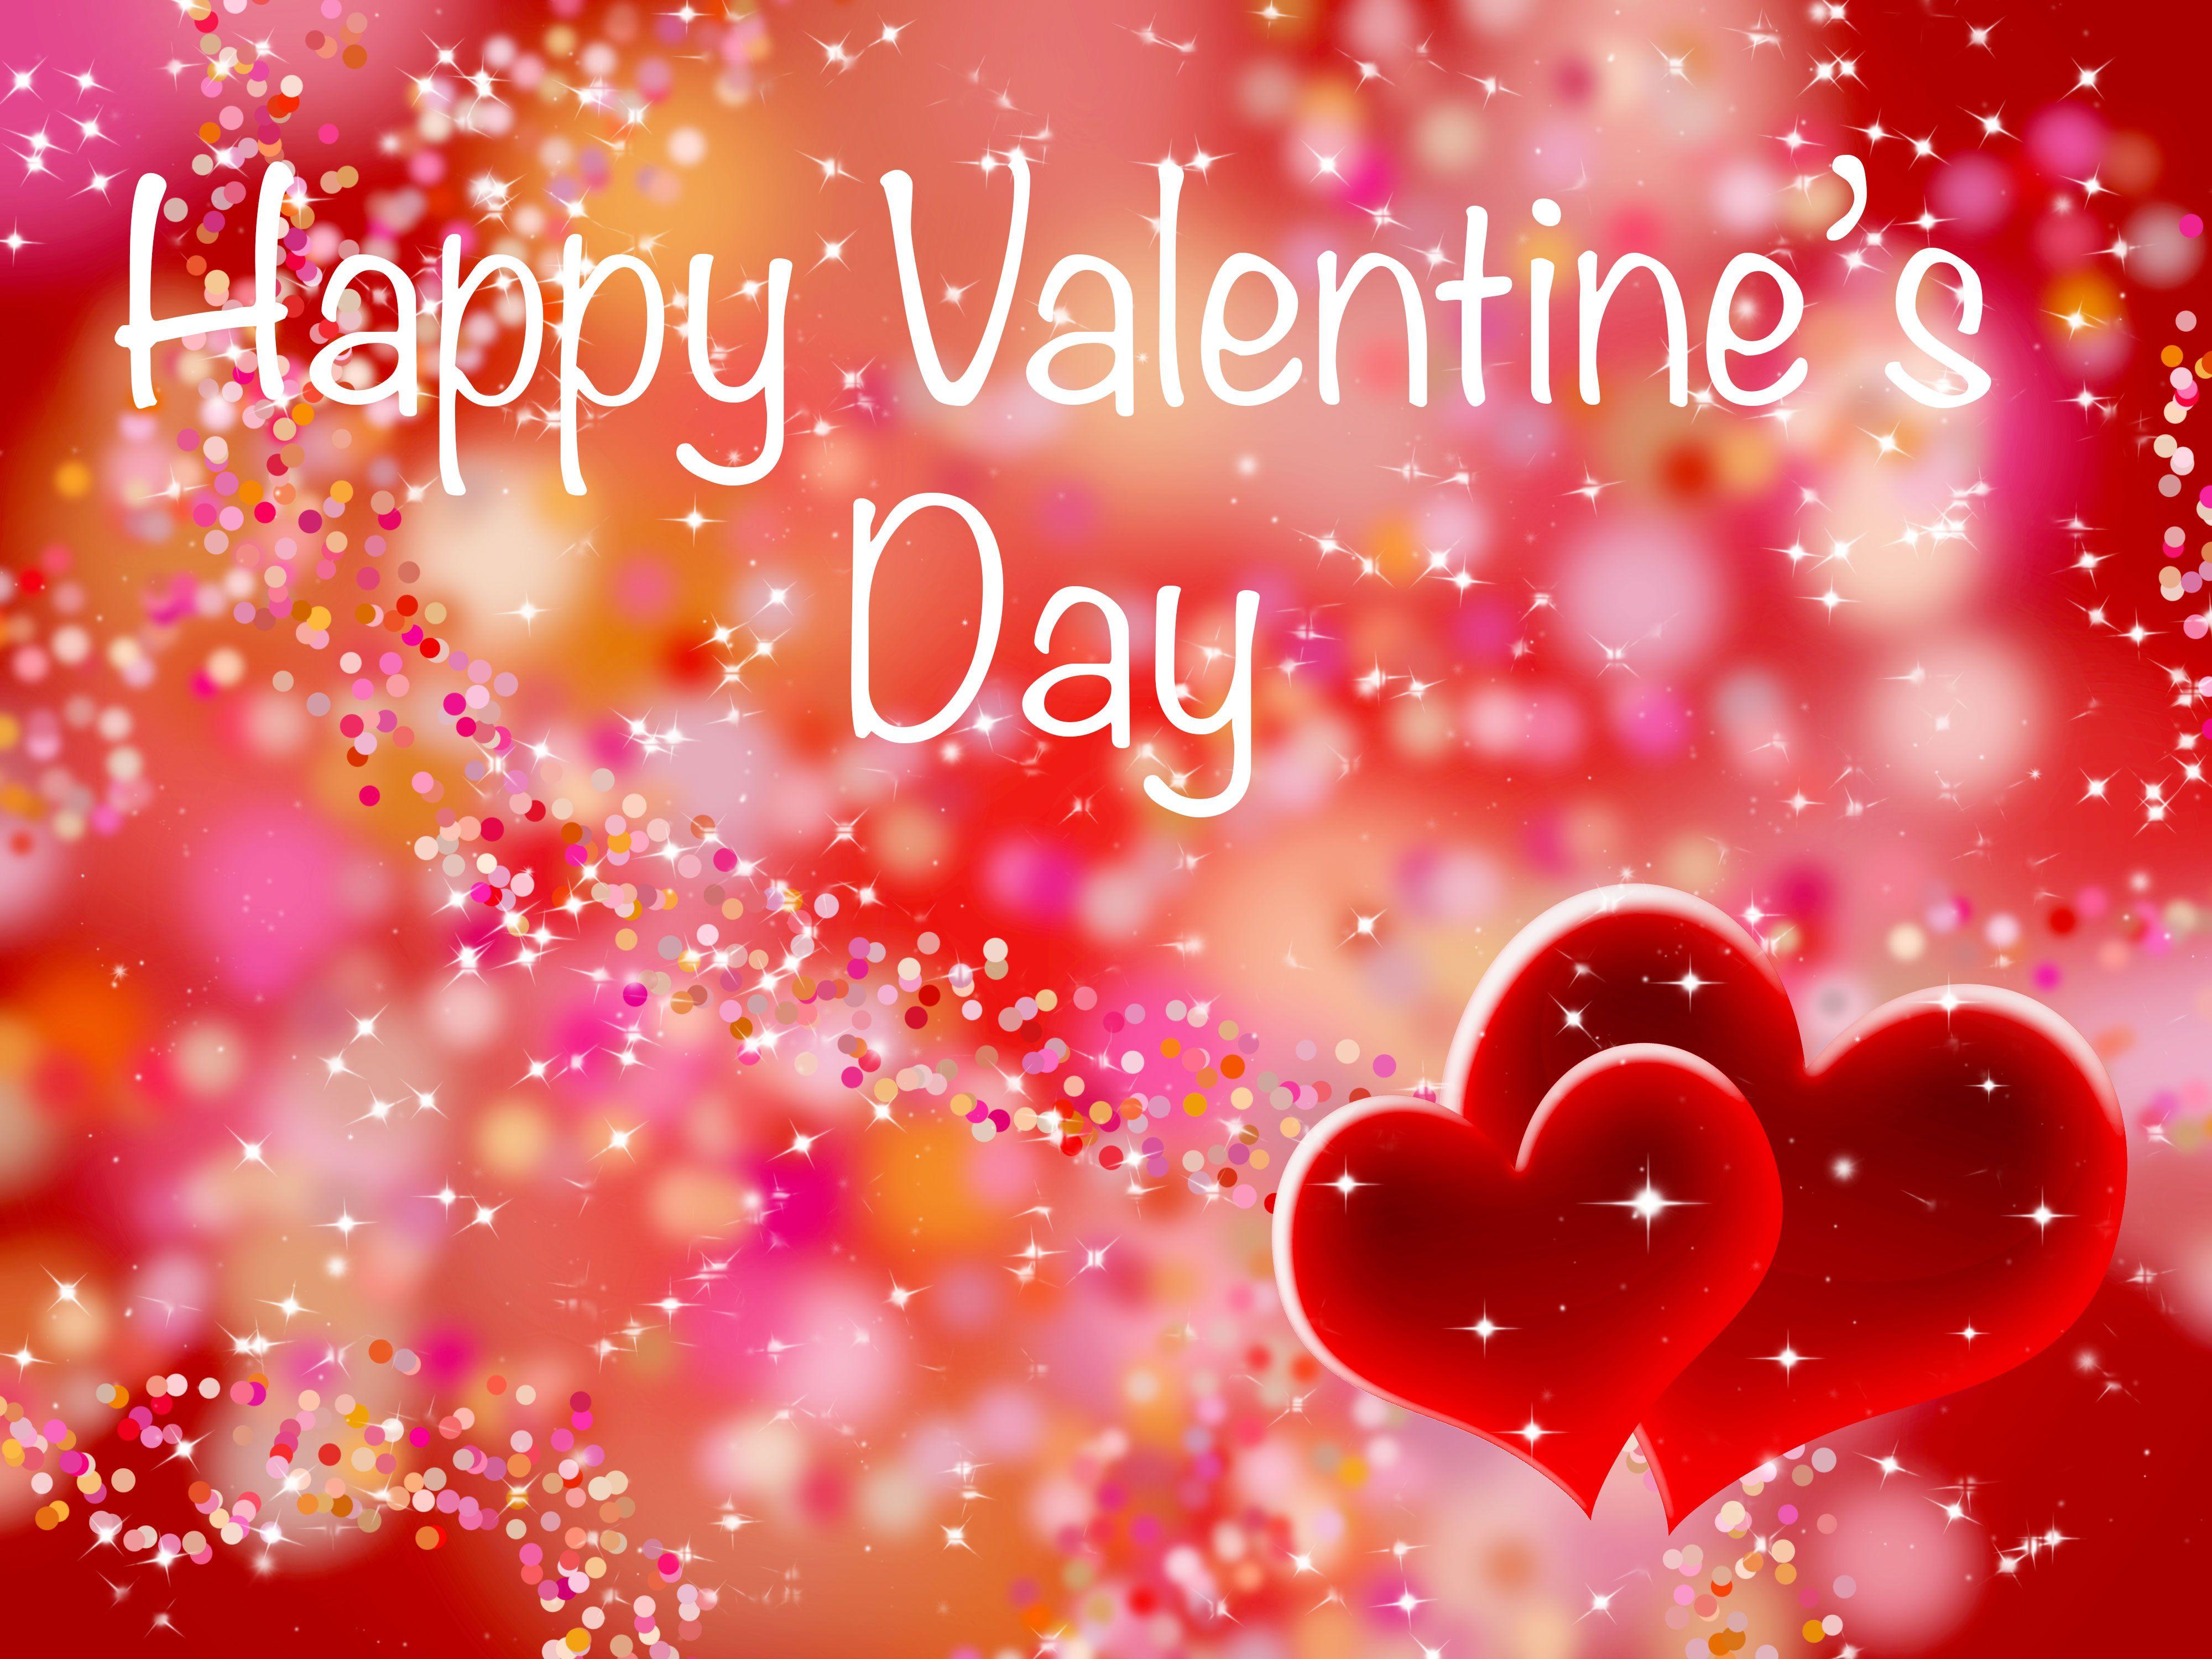 Happy Valentine's Day Card 4k Ultra HD Wallpaper. Background Image